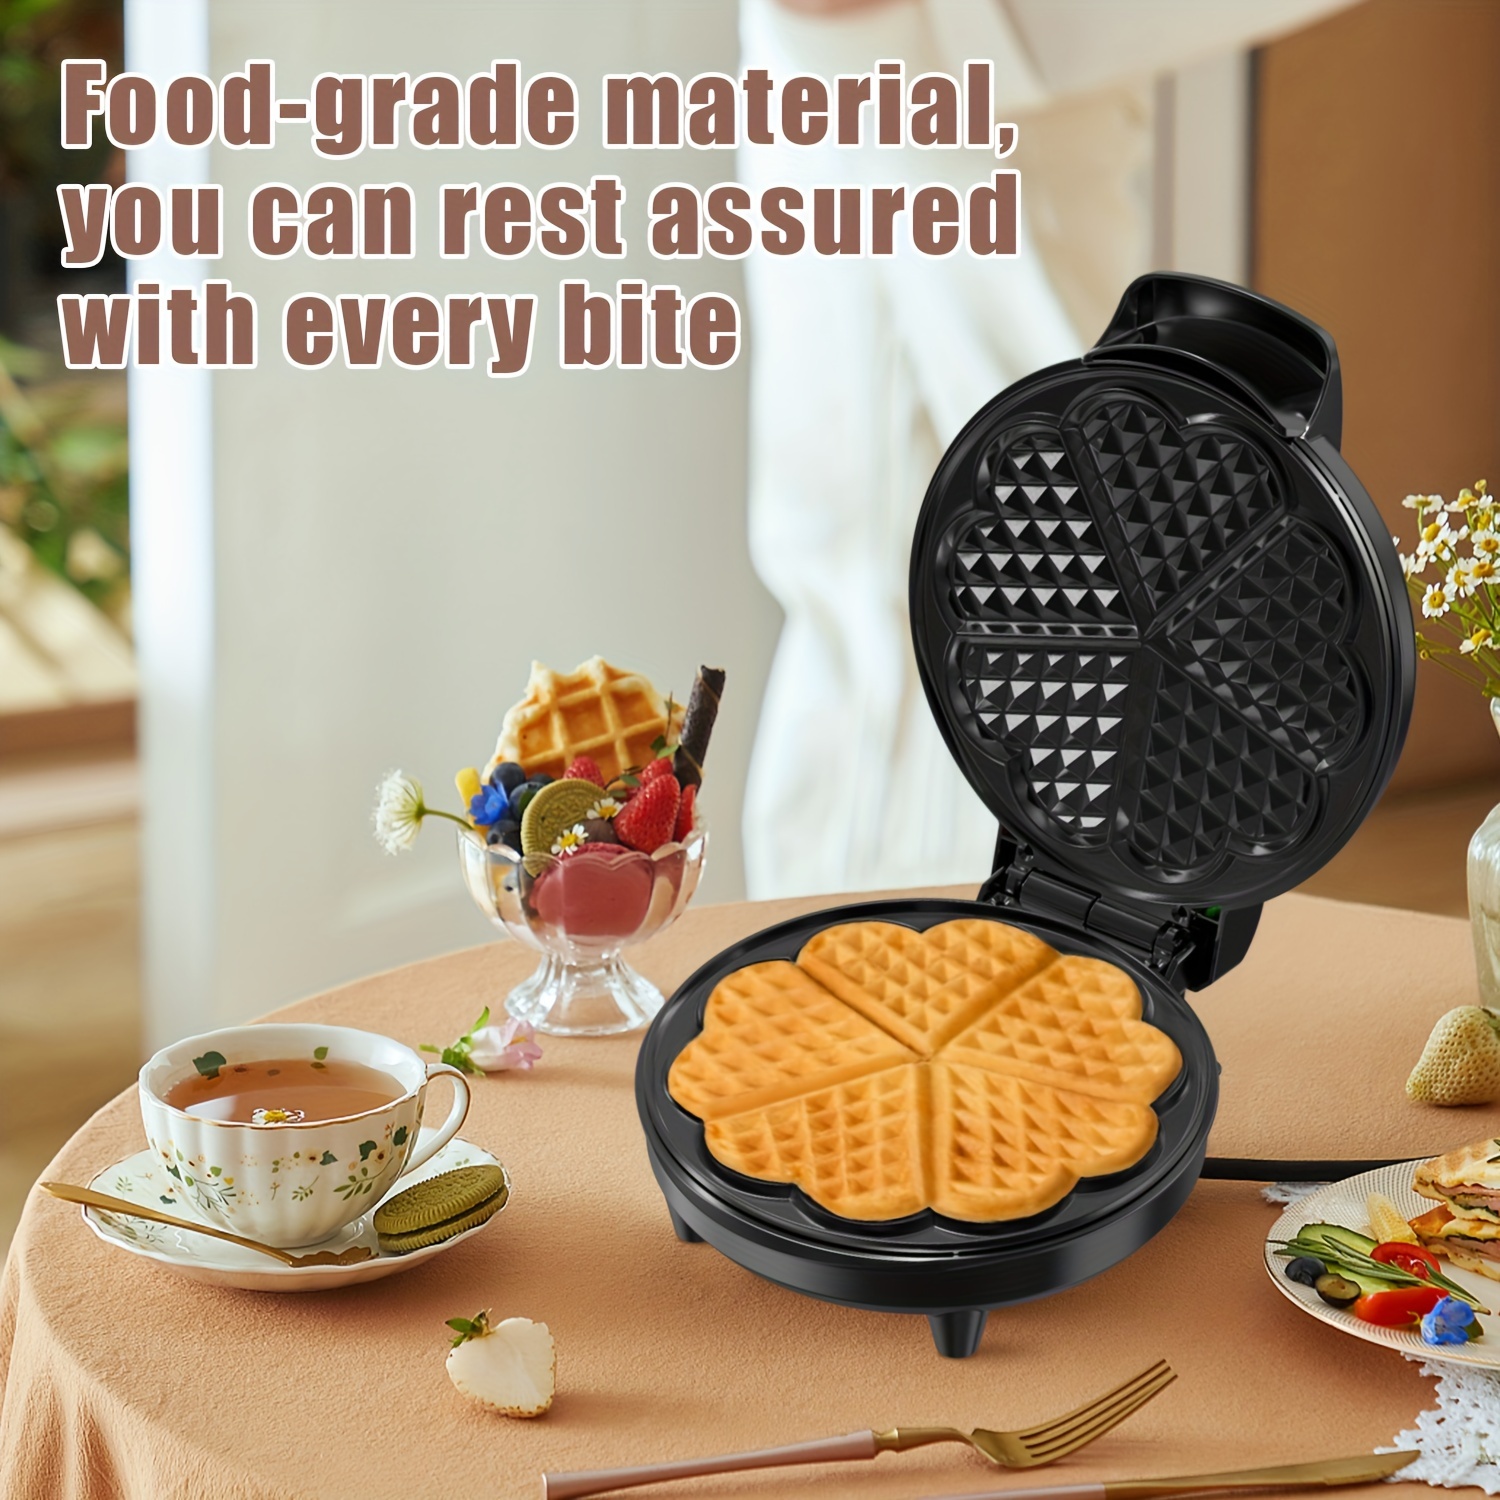 

1pc, Pancerka Belgian Waffle Maker With Adjustable Temperature Control, Non-stick Plates And Cool Touch Handle, Makes 8" Waffles, Stainless Steel, Kitchen Supplies, Kitchen Accessories